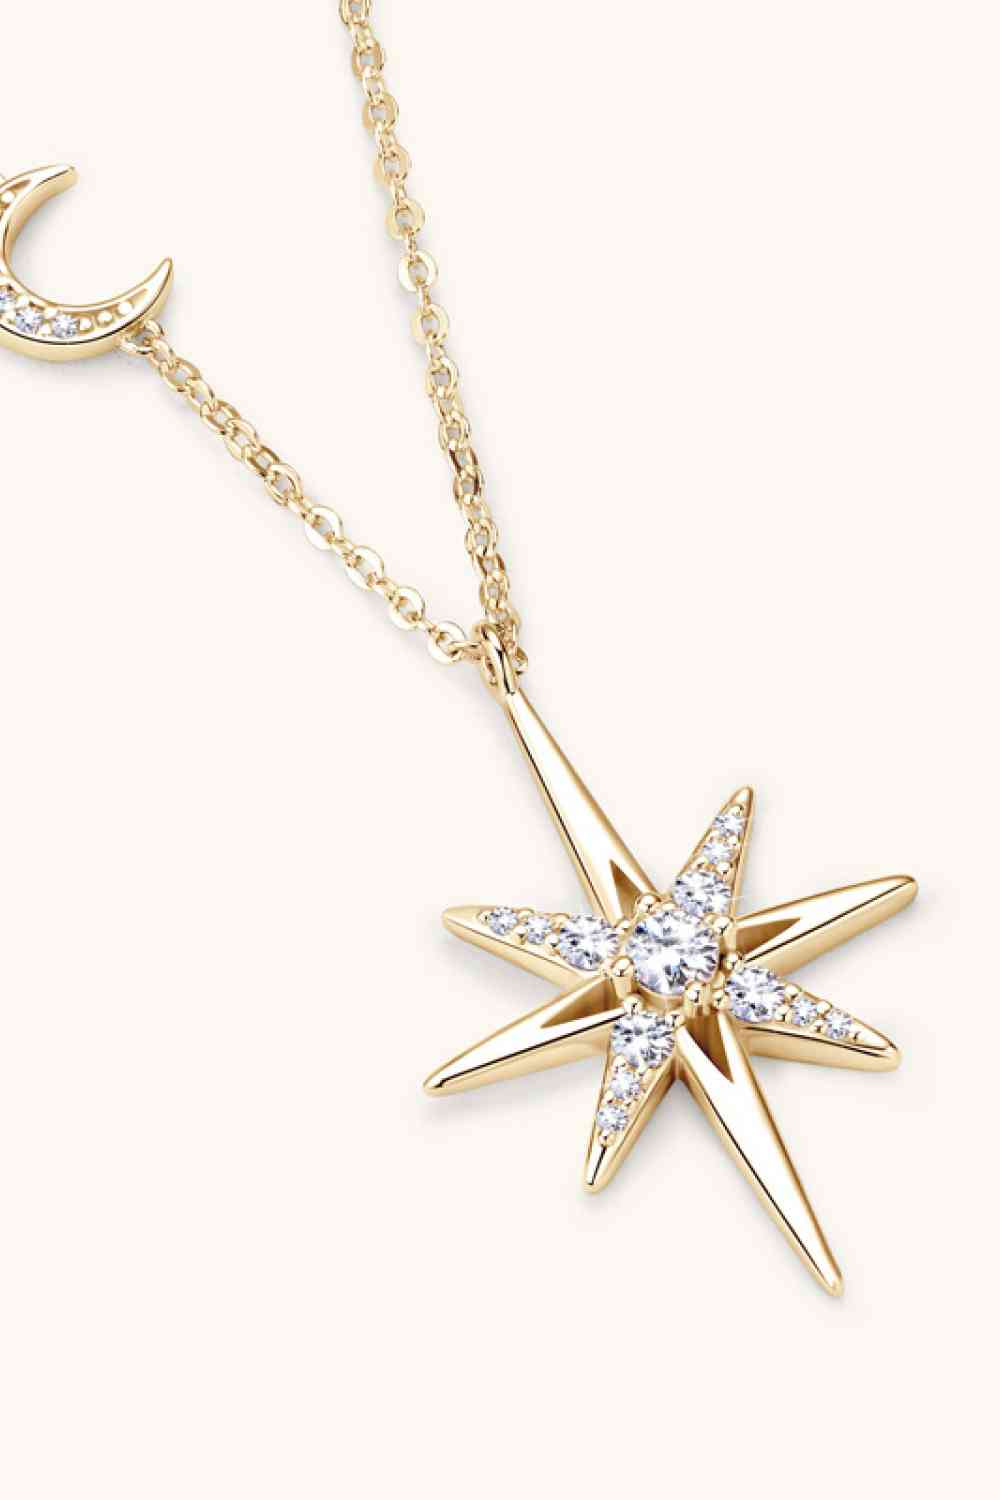 Moissanite 925 Sterling Silver Necklace  [Click for additional options]